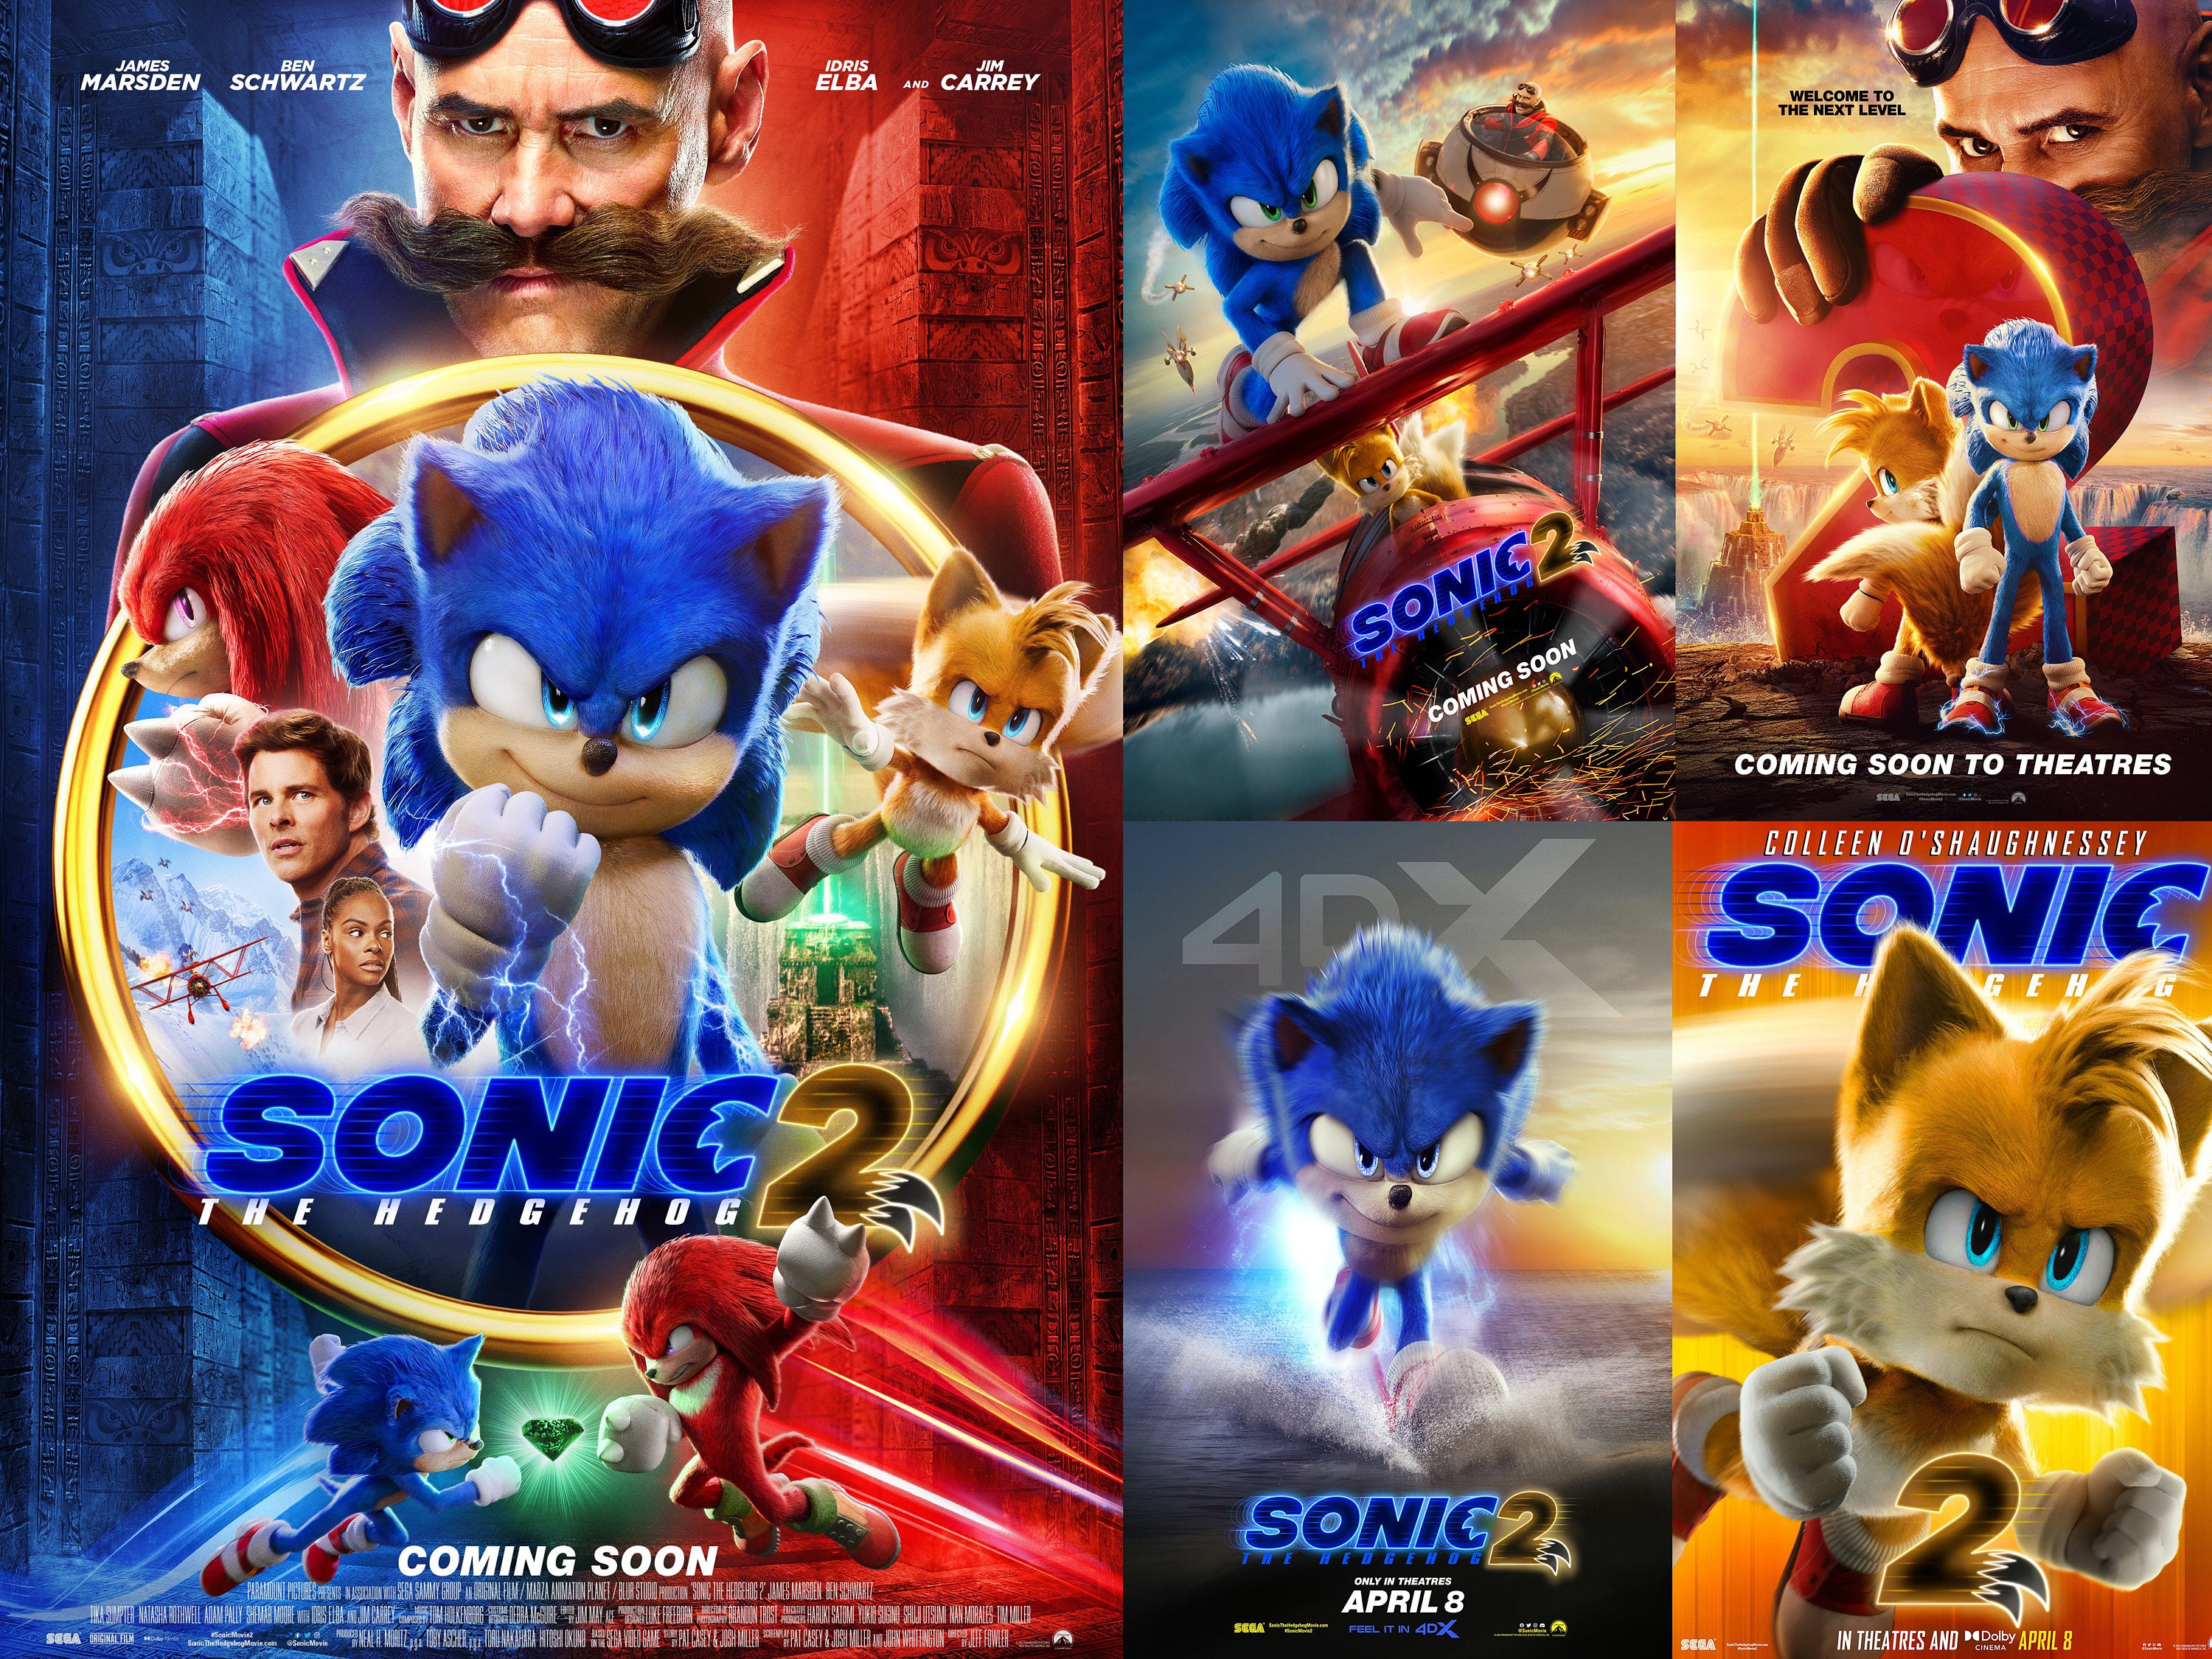 Sonic the Hedgehog 2 movie final trailer and throwback poster